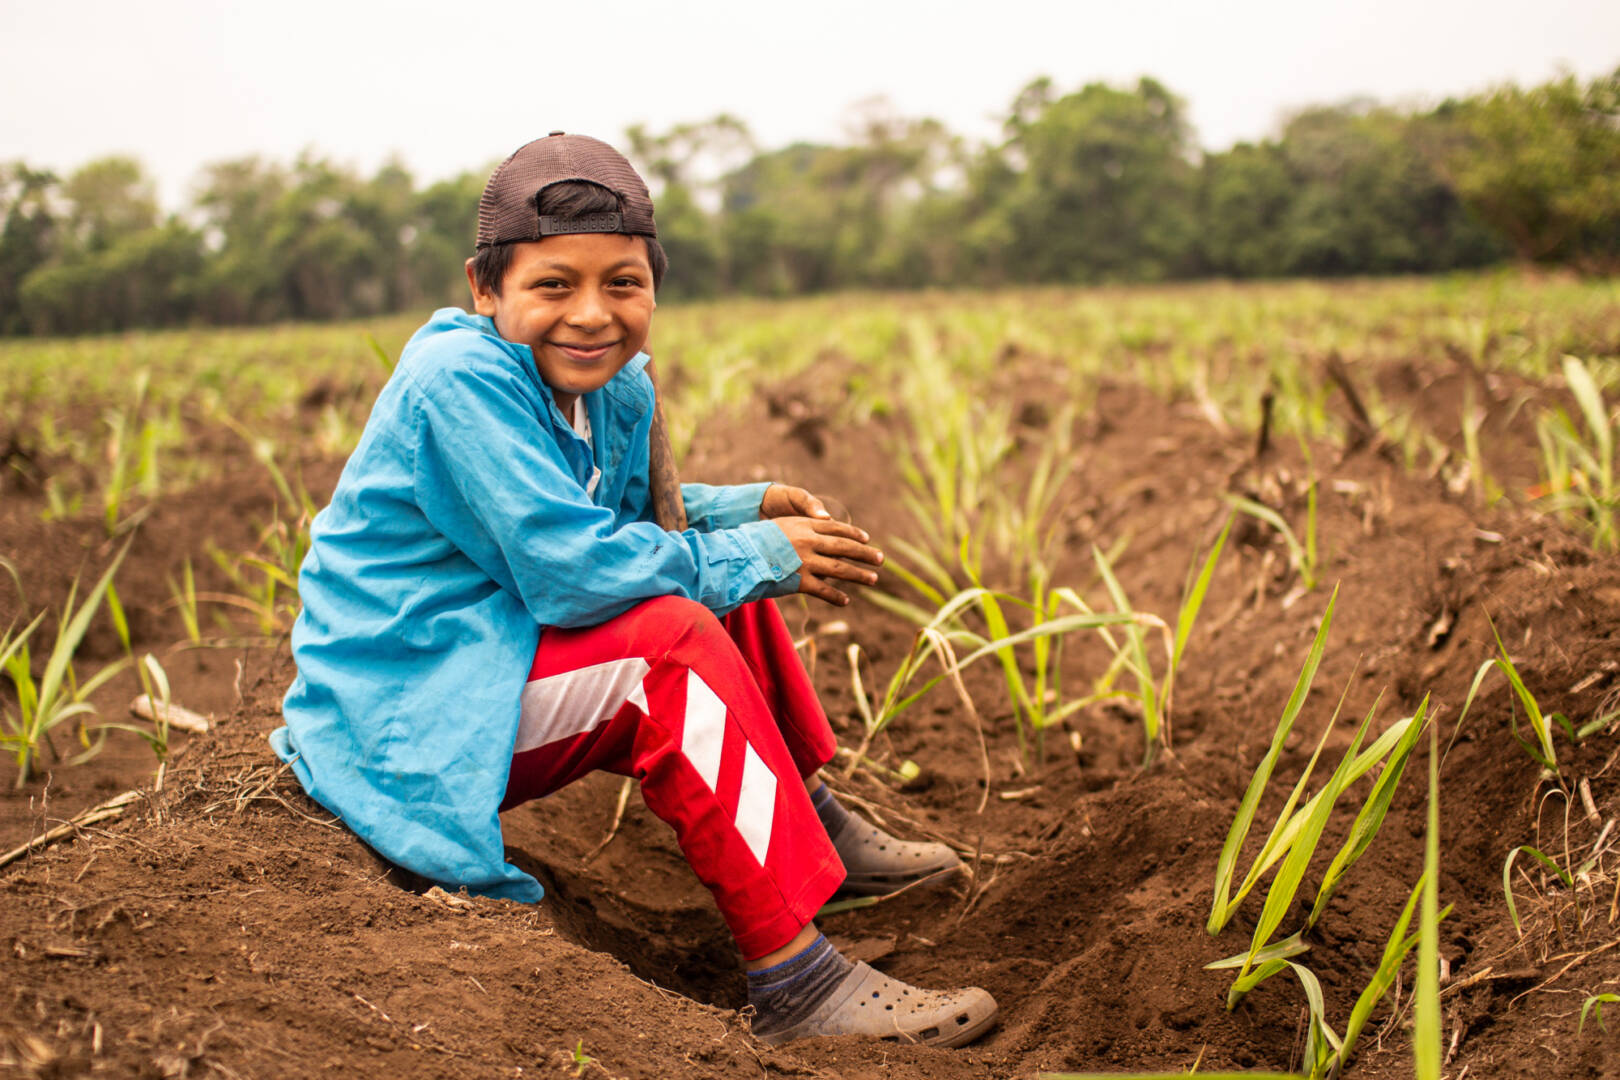 A boy’s eyes glisten as he smiles while sitting in a field of growing crops.